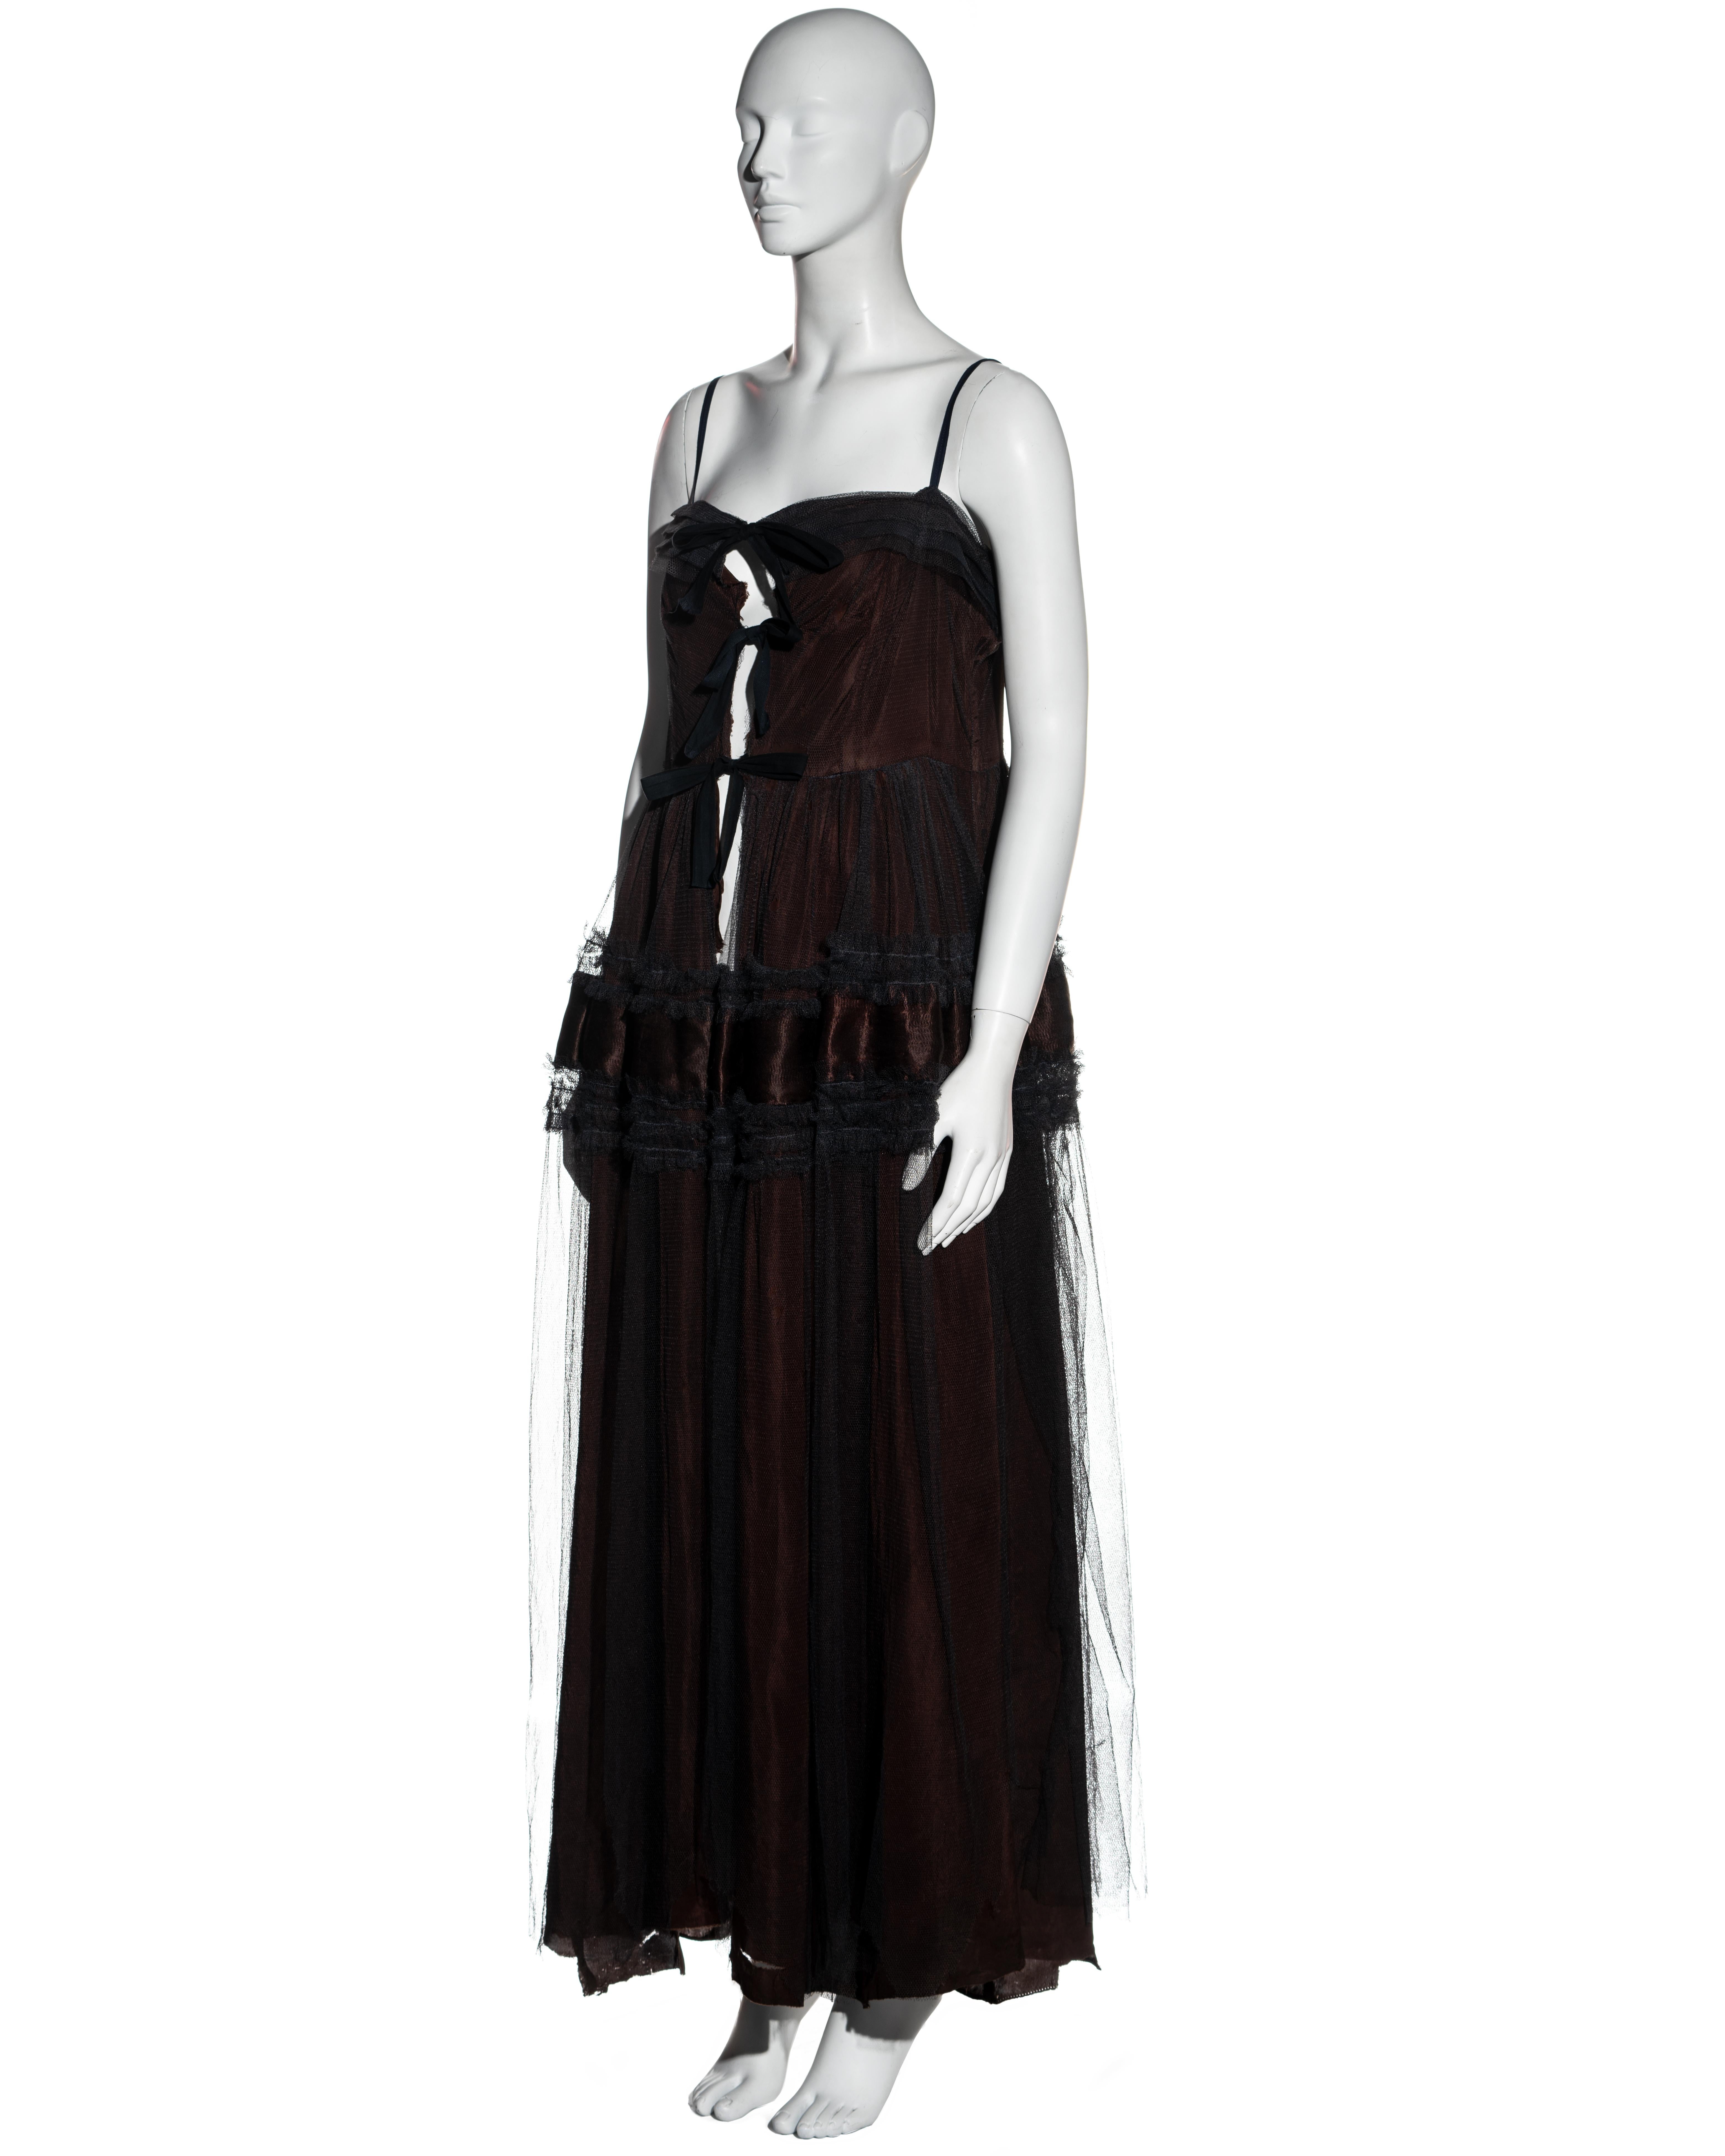 ▪ Martin Margiela full length waist coat 
▪ Made from a recycled 1950's ballgown with slit down the front 
▪ 3 black ties at the front 
▪ Metal zipper at side seam 
▪ Pleated and ruffled details on bodice and skirt 
▪ 